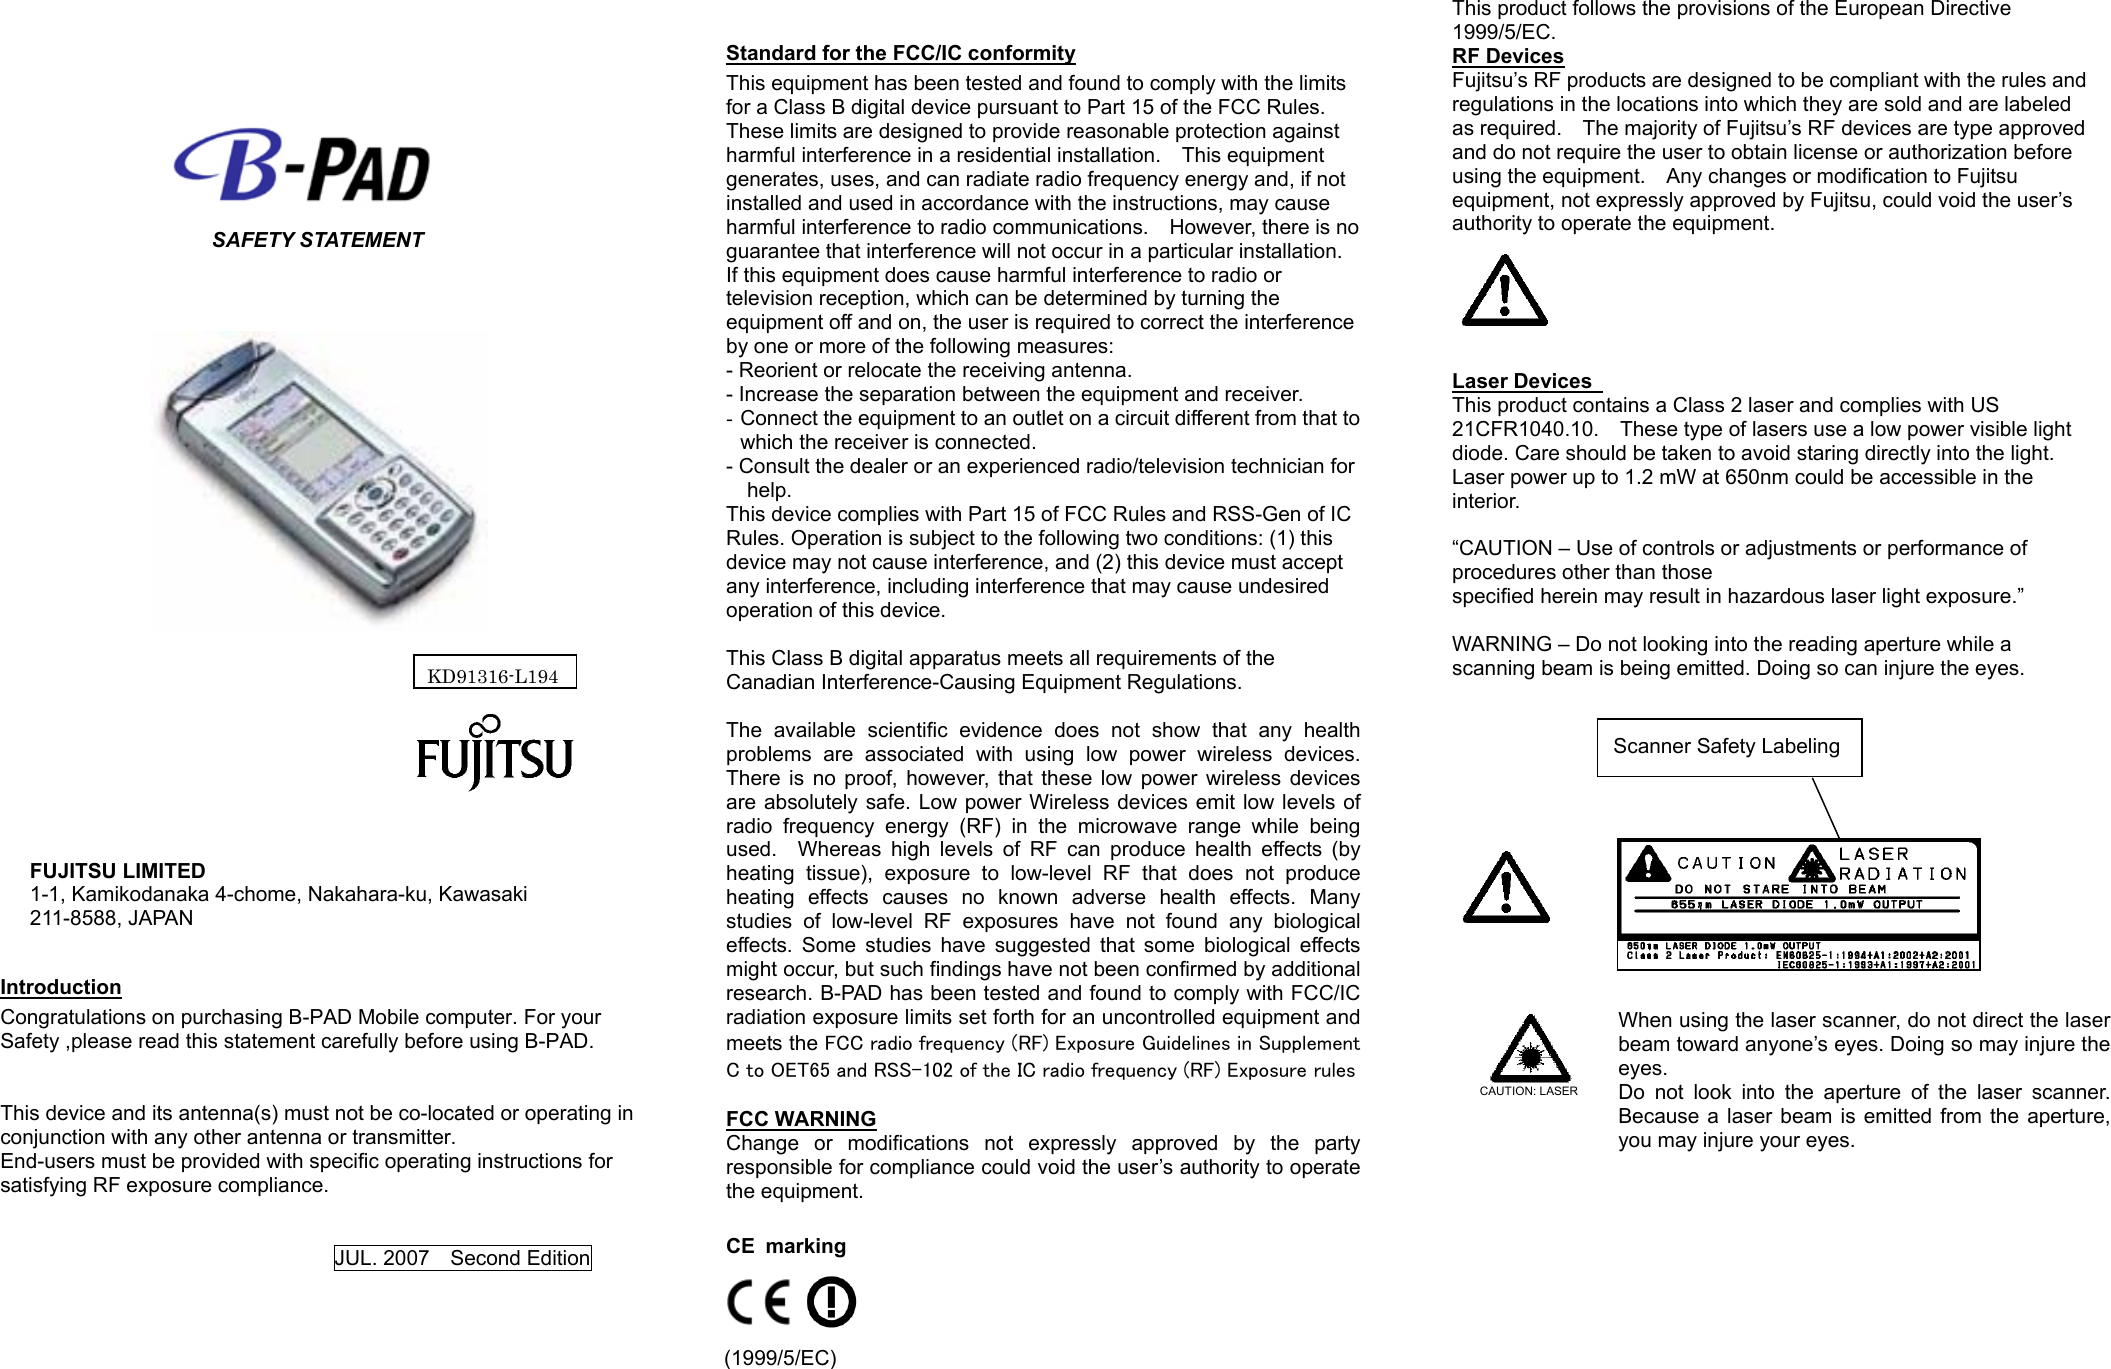     SAFETY STATEMENT                                                                       FUJITSU LIMITED 1-1, Kamikodanaka 4-chome, Nakahara-ku, Kawasaki 211-8588, JAPAN  Introduction Congratulations on purchasing B-PAD Mobile computer. For your Safety ,please read this statement carefully before using B-PAD.   This device and its antenna(s) must not be co-located or operating in conjunction with any other antenna or transmitter. End-users must be provided with specific operating instructions for satisfying RF exposure compliance.   JUL. 2007    Second Edition     Standard for the FCC/IC conformity This equipment has been tested and found to comply with the limits for a Class B digital device pursuant to Part 15 of the FCC Rules.   These limits are designed to provide reasonable protection against harmful interference in a residential installation.    This equipment generates, uses, and can radiate radio frequency energy and, if not installed and used in accordance with the instructions, may cause harmful interference to radio communications.    However, there is no guarantee that interference will not occur in a particular installation.   If this equipment does cause harmful interference to radio or television reception, which can be determined by turning the equipment off and on, the user is required to correct the interference by one or more of the following measures: - Reorient or relocate the receiving antenna. - Increase the separation between the equipment and receiver. -  Connect the equipment to an outlet on a circuit different from that to which the receiver is connected. - Consult the dealer or an experienced radio/television technician for help. This device complies with Part 15 of FCC Rules and RSS-Gen of IC Rules. Operation is subject to the following two conditions: (1) this device may not cause interference, and (2) this device must accept any interference, including interference that may cause undesired operation of this device.  This Class B digital apparatus meets all requirements of the Canadian Interference-Causing Equipment Regulations.  The available scientific evidence does not show that any health problems are associated with using low power wireless devices. There is no proof, however, that these low power wireless devices are absolutely safe. Low power Wireless devices emit low levels of radio frequency energy (RF) in the microwave range while being used.  Whereas high levels of RF can produce health effects (by heating tissue), exposure to low-level RF that does not produce heating effects causes no known adverse health effects. Many studies of low-level RF exposures have not found any biological effects. Some studies have suggested that some biological effects might occur, but such findings have not been confirmed by additional research. B-PAD has been tested and found to comply with FCC/IC radiation exposure limits set forth for an uncontrolled equipment and meets the FCC radio frequency (RF) Exposure Guidelines in Supplement C to OET65 and RSS-102 of the IC radio frequency (RF) Exposure rules  FCC WARNING Change or modifications not expressly approved by the party responsible for compliance could void the user’s authority to operate the equipment.  CE marking                 (1999/5/EC) This product follows the provisions of the European Directive 1999/5/EC. RF Devices Fujitsu’s RF products are designed to be compliant with the rules and regulations in the locations into which they are sold and are labeled as required.    The majority of Fujitsu’s RF devices are type approved and do not require the user to obtain license or authorization before using the equipment.    Any changes or modification to Fujitsu   equipment, not expressly approved by Fujitsu, could void the user’s authority to operate the equipment.       Laser Devices   This product contains a Class 2 laser and complies with US 21CFR1040.10.    These type of lasers use a low power visible light diode. Care should be taken to avoid staring directly into the light.     Laser power up to 1.2 mW at 650nm could be accessible in the interior.   “CAUTION – Use of controls or adjustments or performance of procedures other than those   specified herein may result in hazardous laser light exposure.”  WARNING – Do not looking into the reading aperture while a scanning beam is being emitted. Doing so can injure the eyes.                            CAUTION: LASER    When using the laser scanner, do not direct the laser beam toward anyone’s eyes. Doing so may injure the eyes. Do not look into the aperture of the laser scanner. Because a laser beam is emitted from the aperture, you may injure your eyes.       Scanner Safety Labeling KD91316-L194 